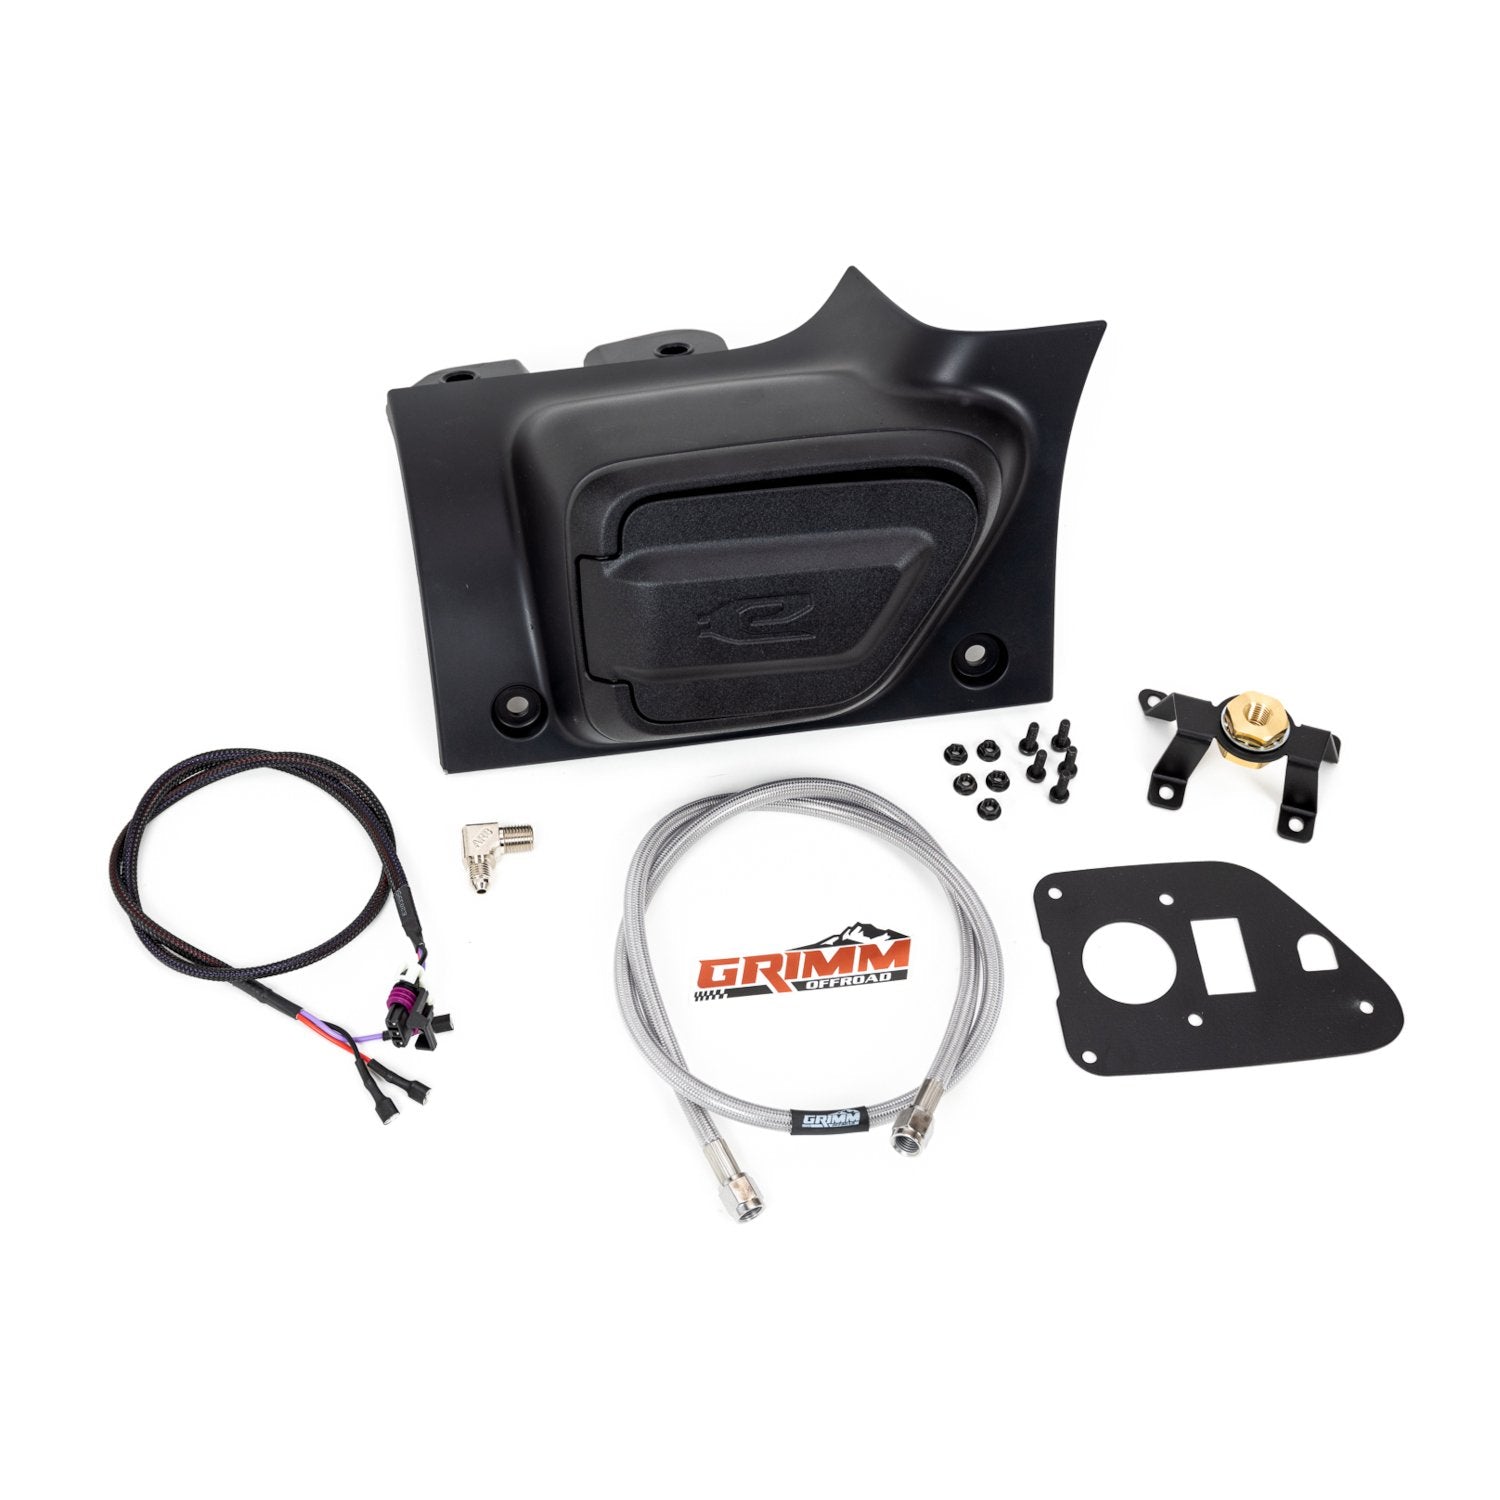 Grimm OffRoad Jeep Wrangler JL/JLU & Gladiator JT 4XE Charge Port Air Chuck Conversion Kit